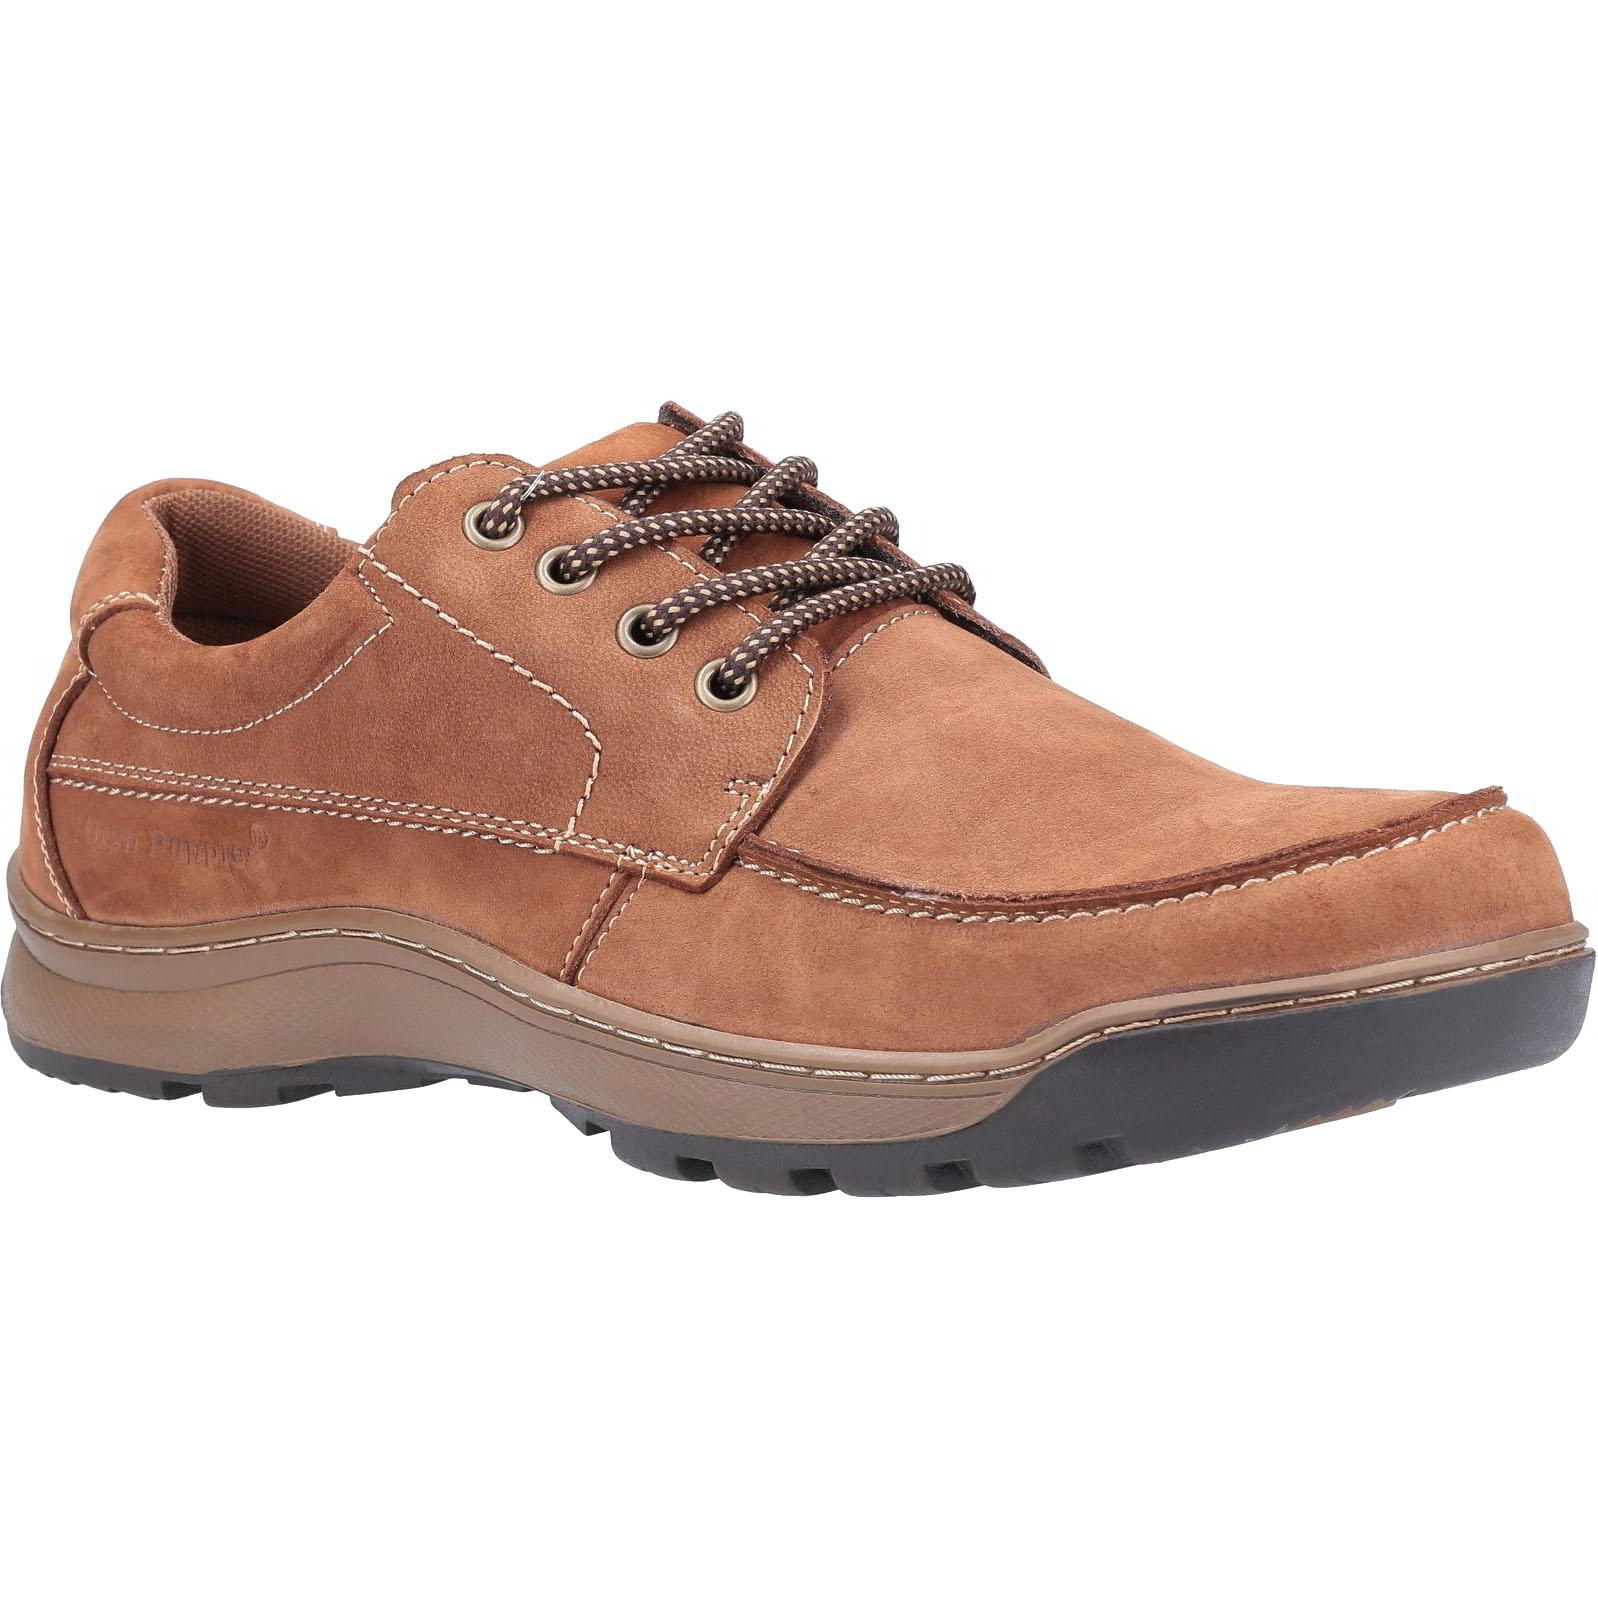 Hush Puppies Men's Tucker Leather Lace Up Shoes - UK 12